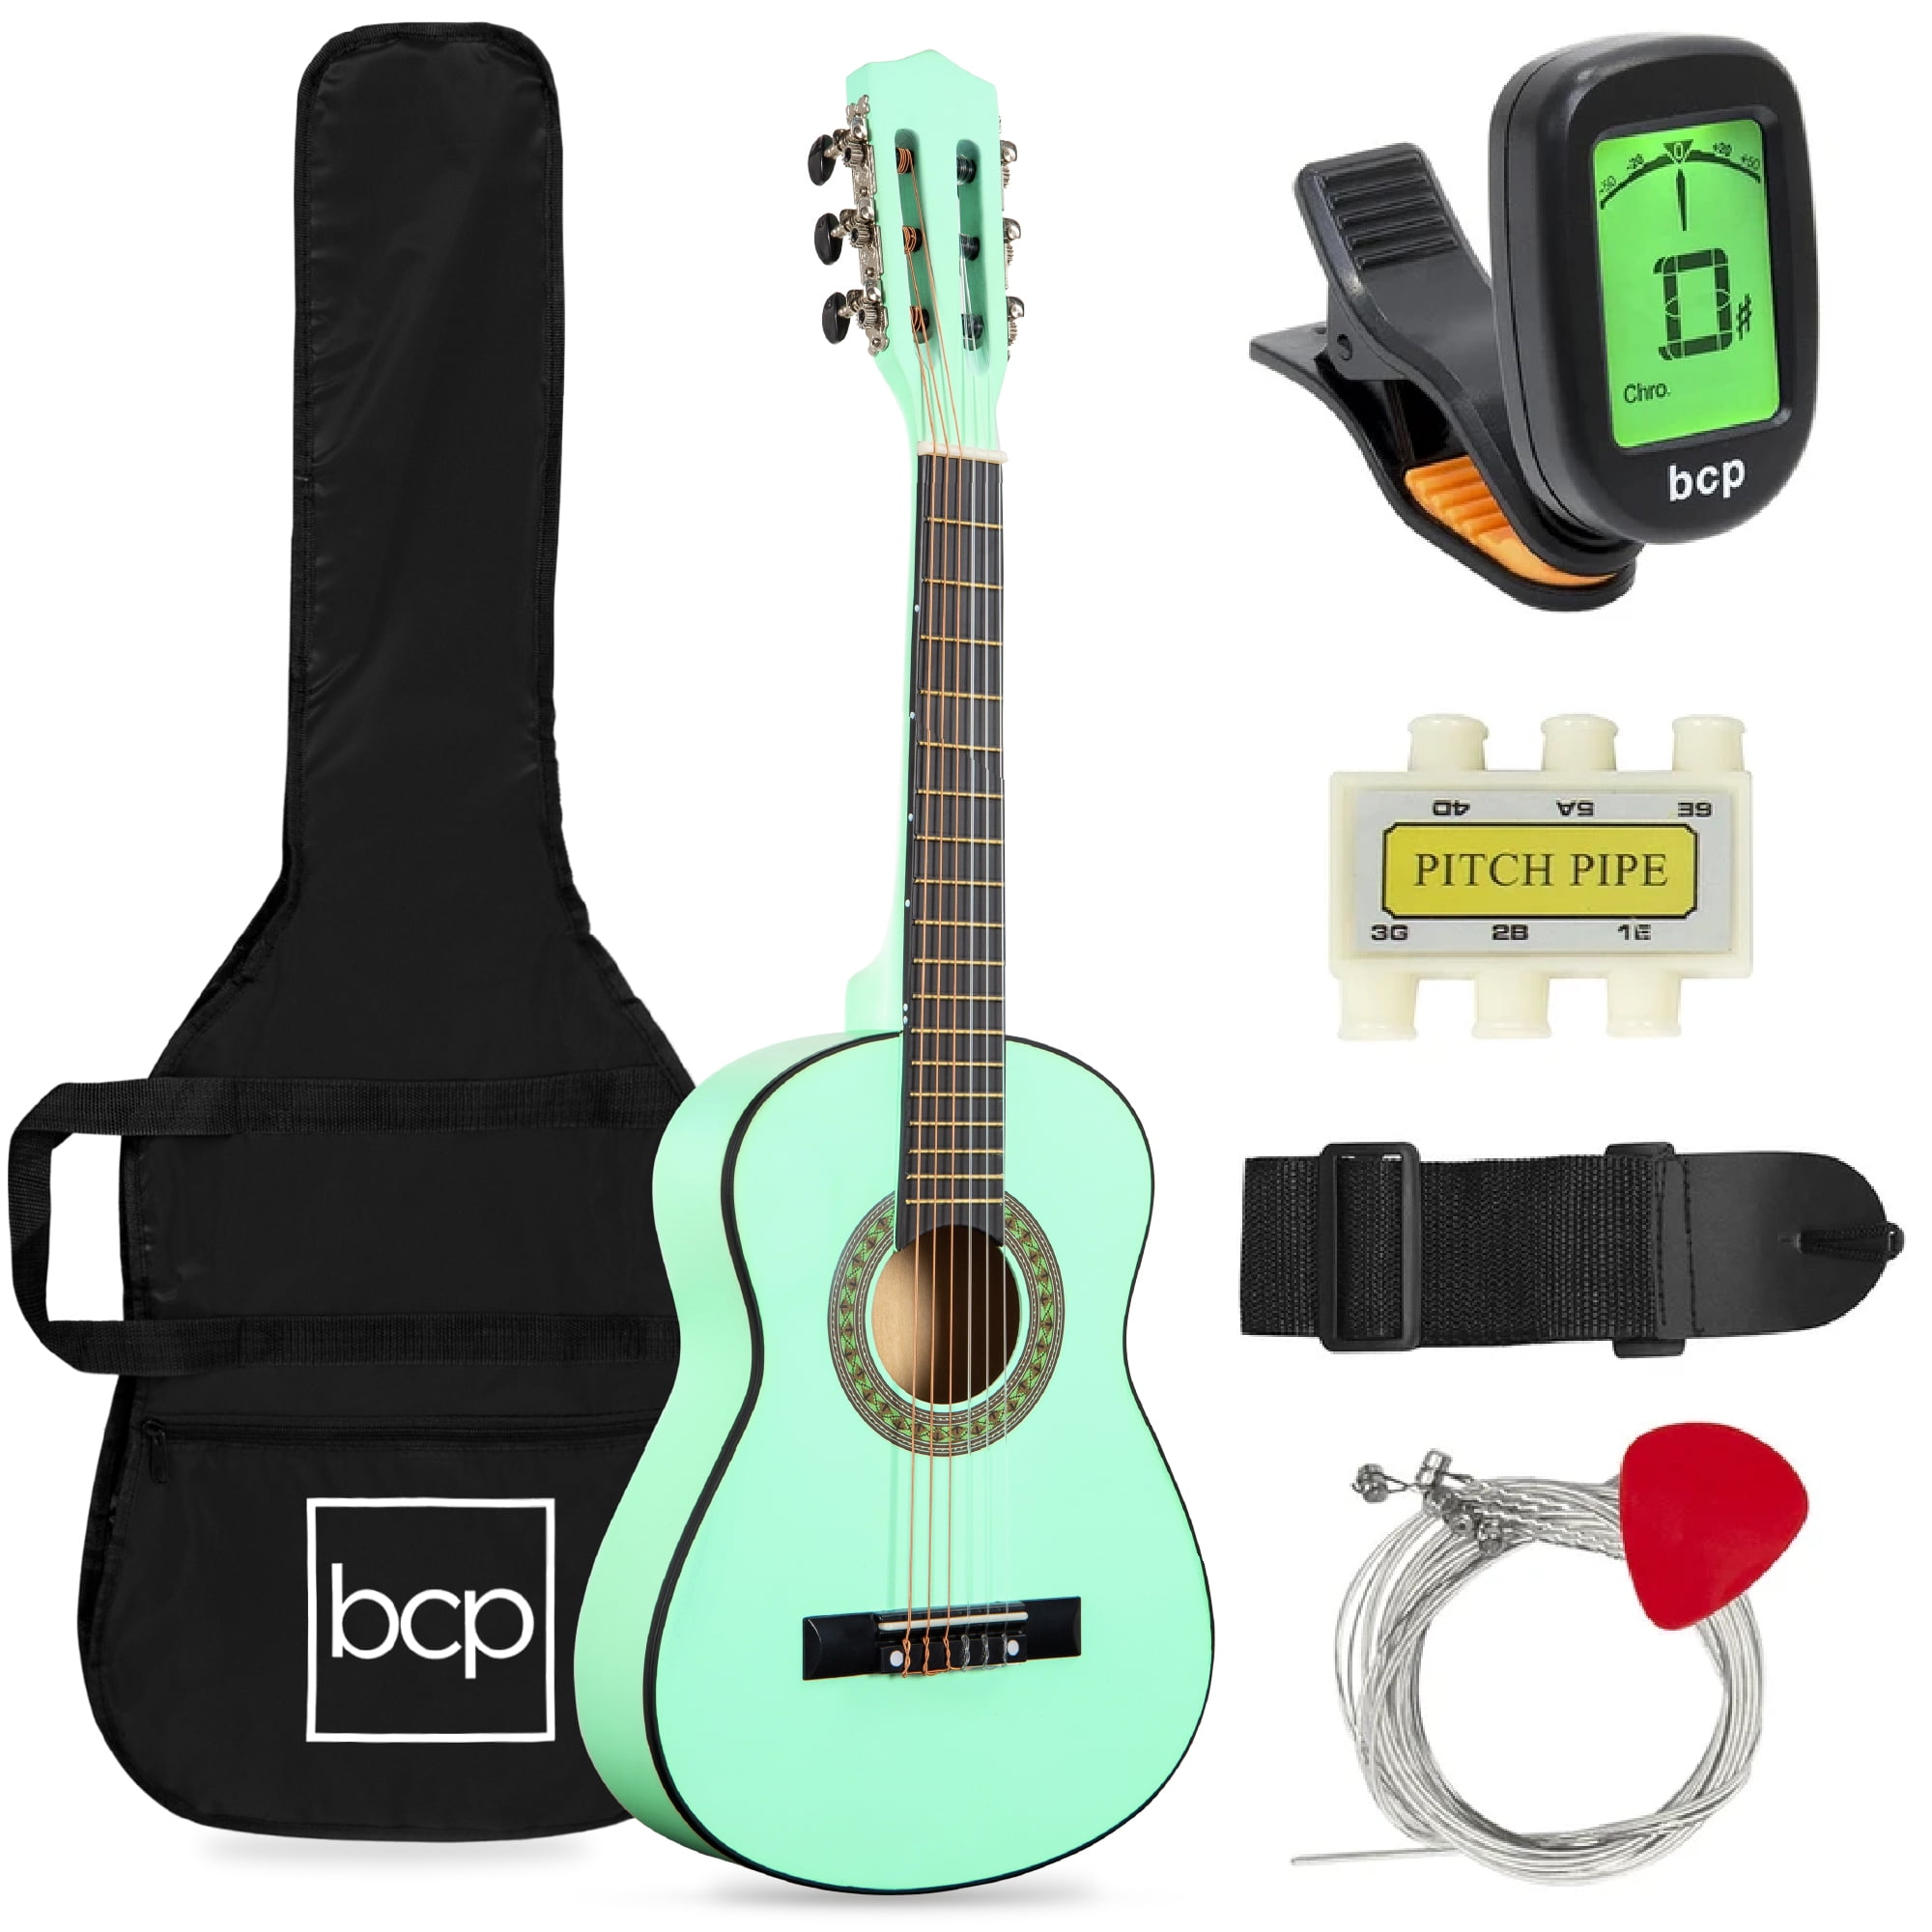 Best Choice Products 30" Kids Acoustic Guitar Beginner Starter Kit with Tuner, Strap, Case and Strings, SoCal Green